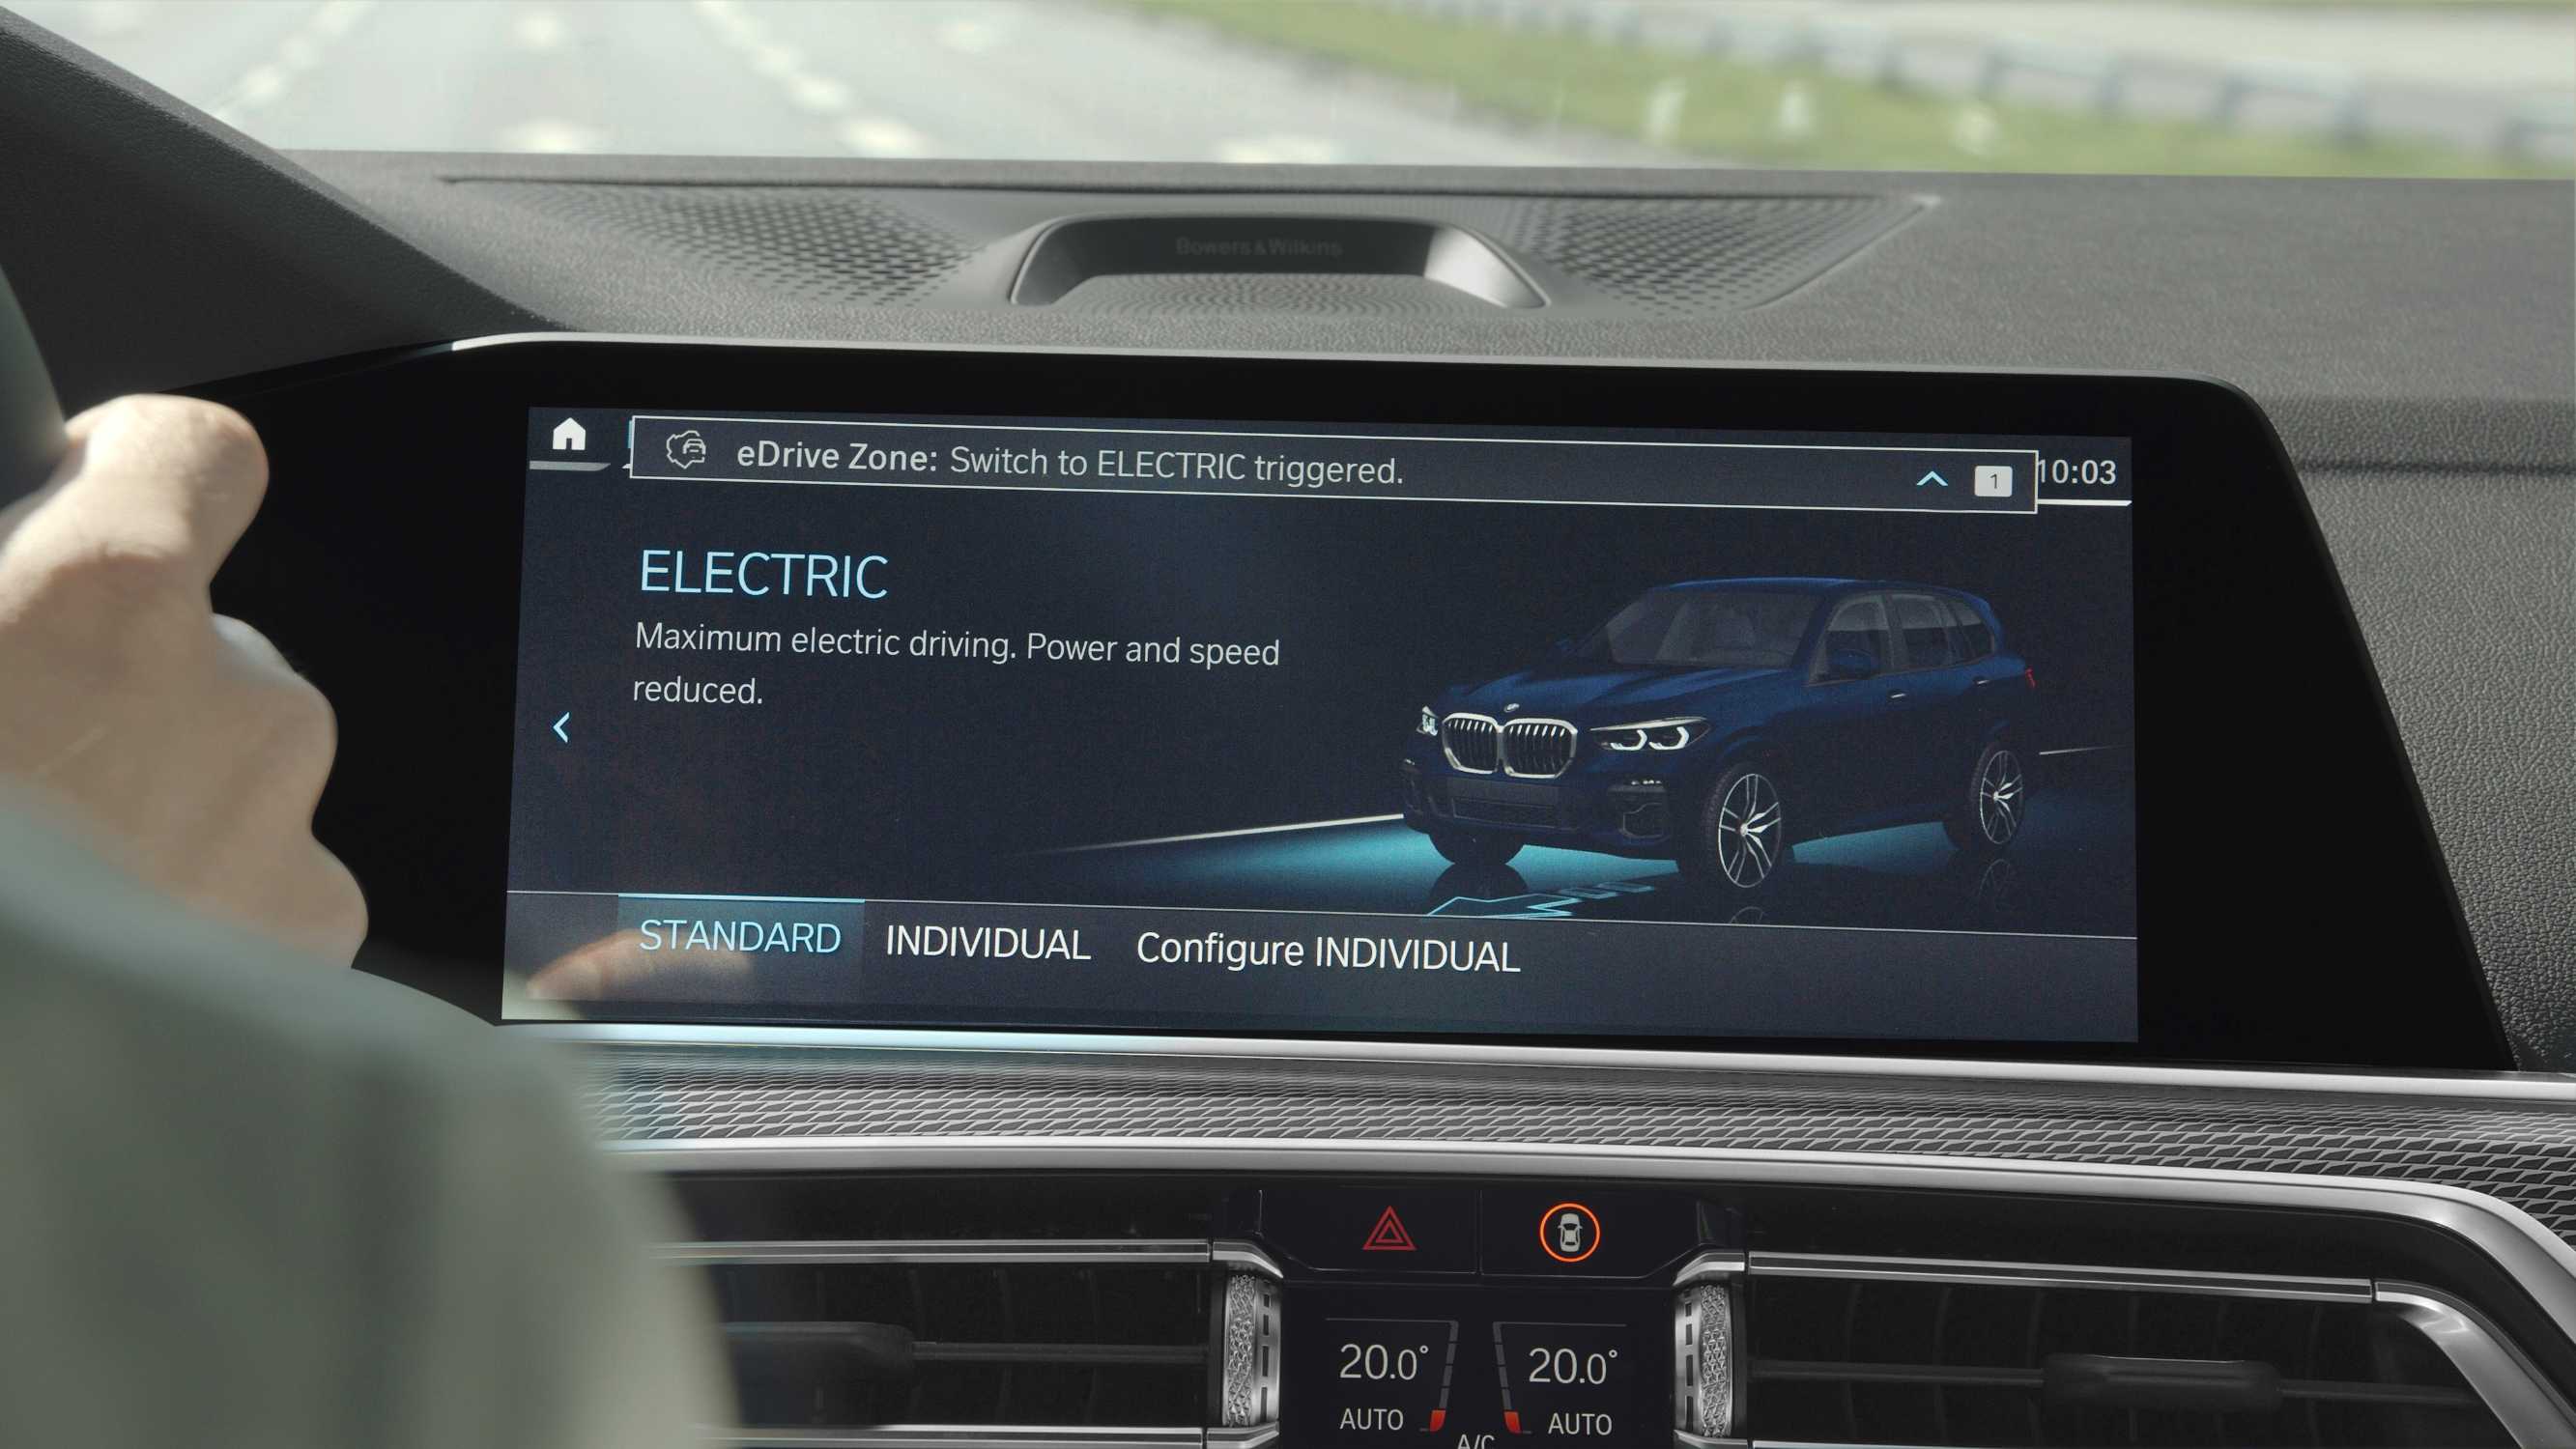 BMW eDrive Zones test vehicle automatically switches into electric driving mode (06/2019).